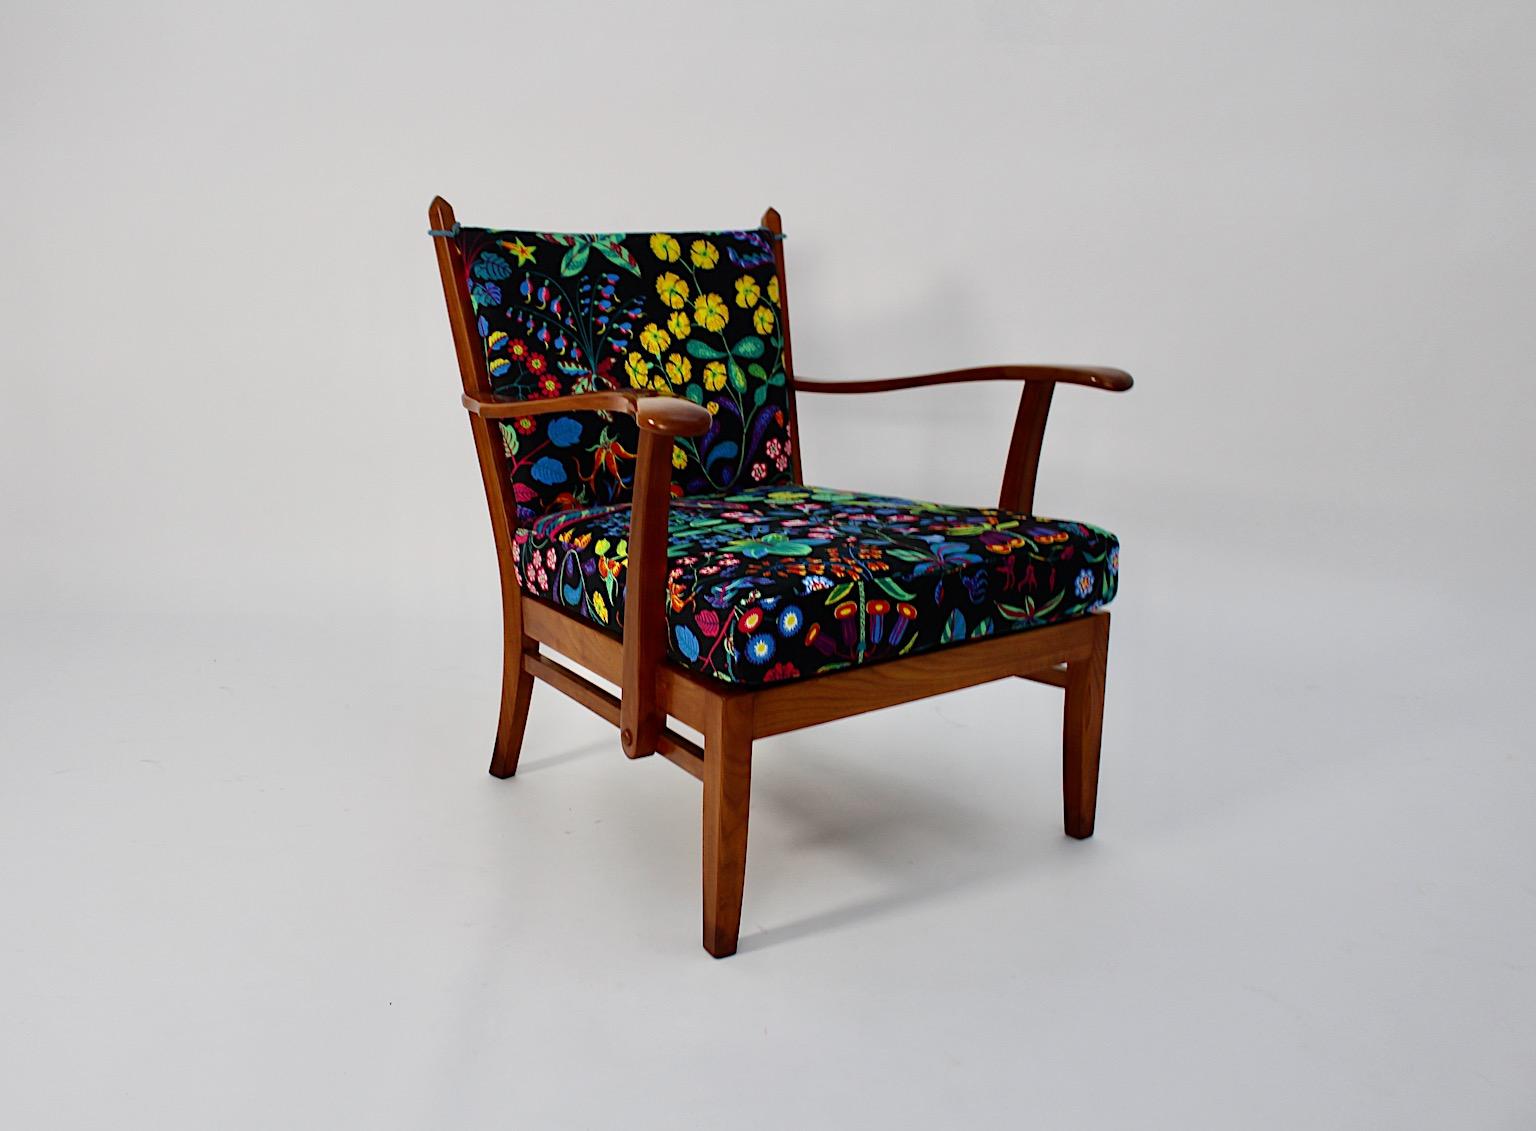 Art Deco vintage cherry armchair attributed to Josef Frank circa 1925 Austria.
A beautiful cosy armchair from solid cherry wood with replaced new hand made loose cushions attributed to designer Josef Frank.
This armchair shows a wonderful honey